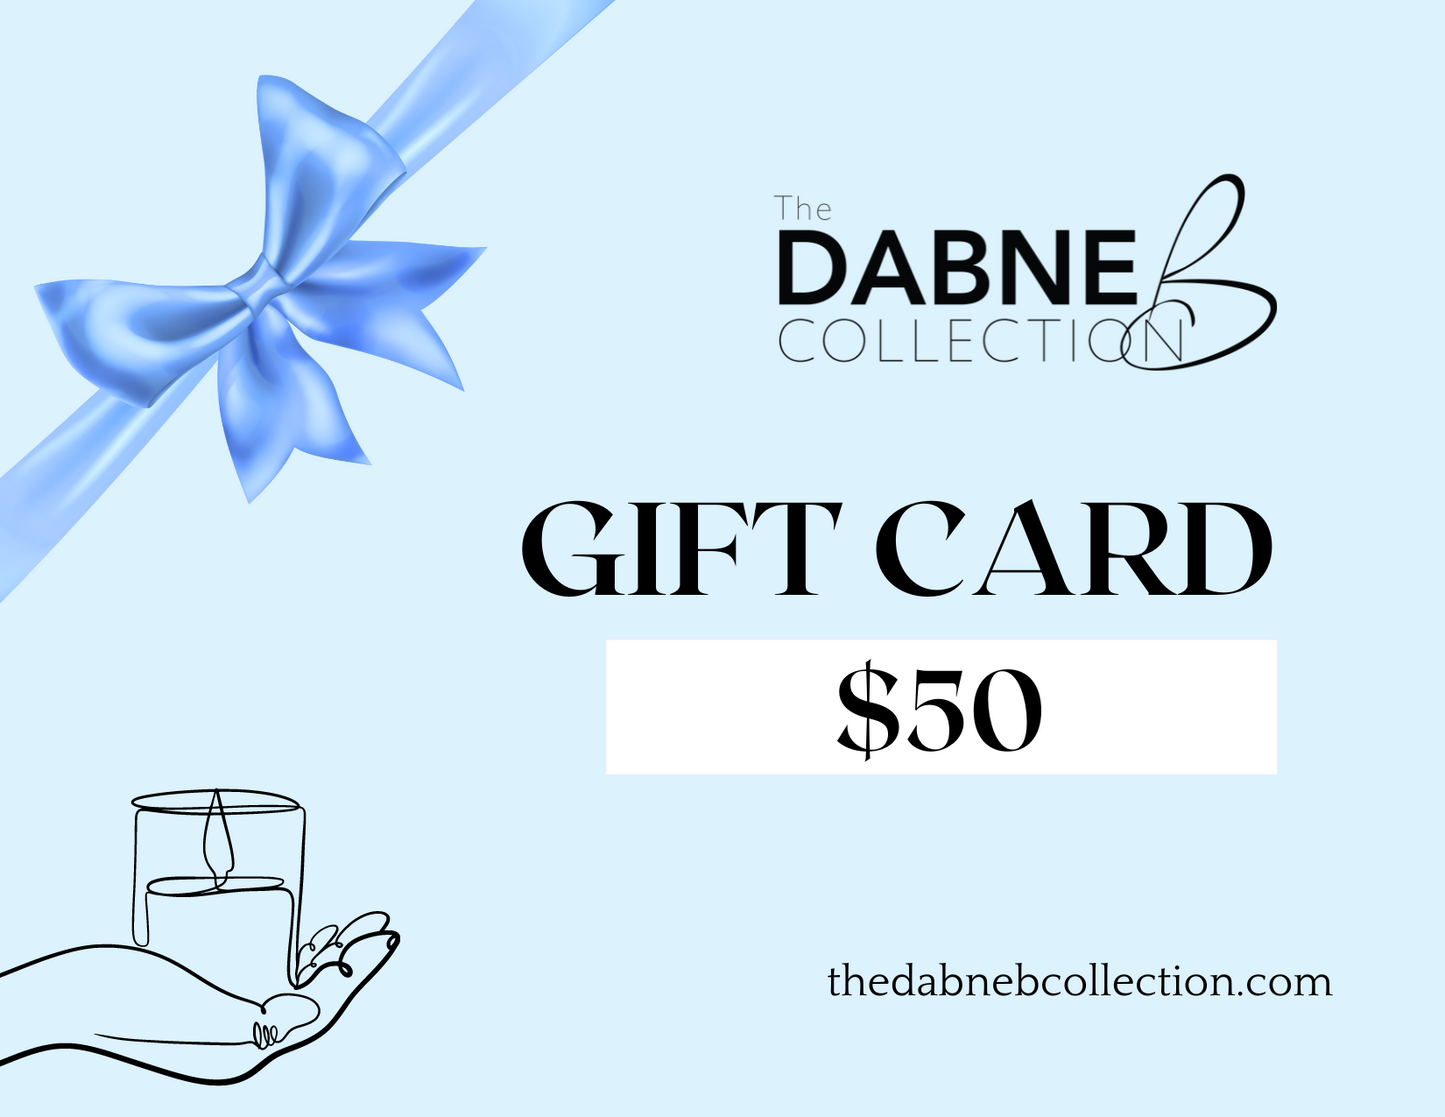 The Dabne B Collection Gift Card